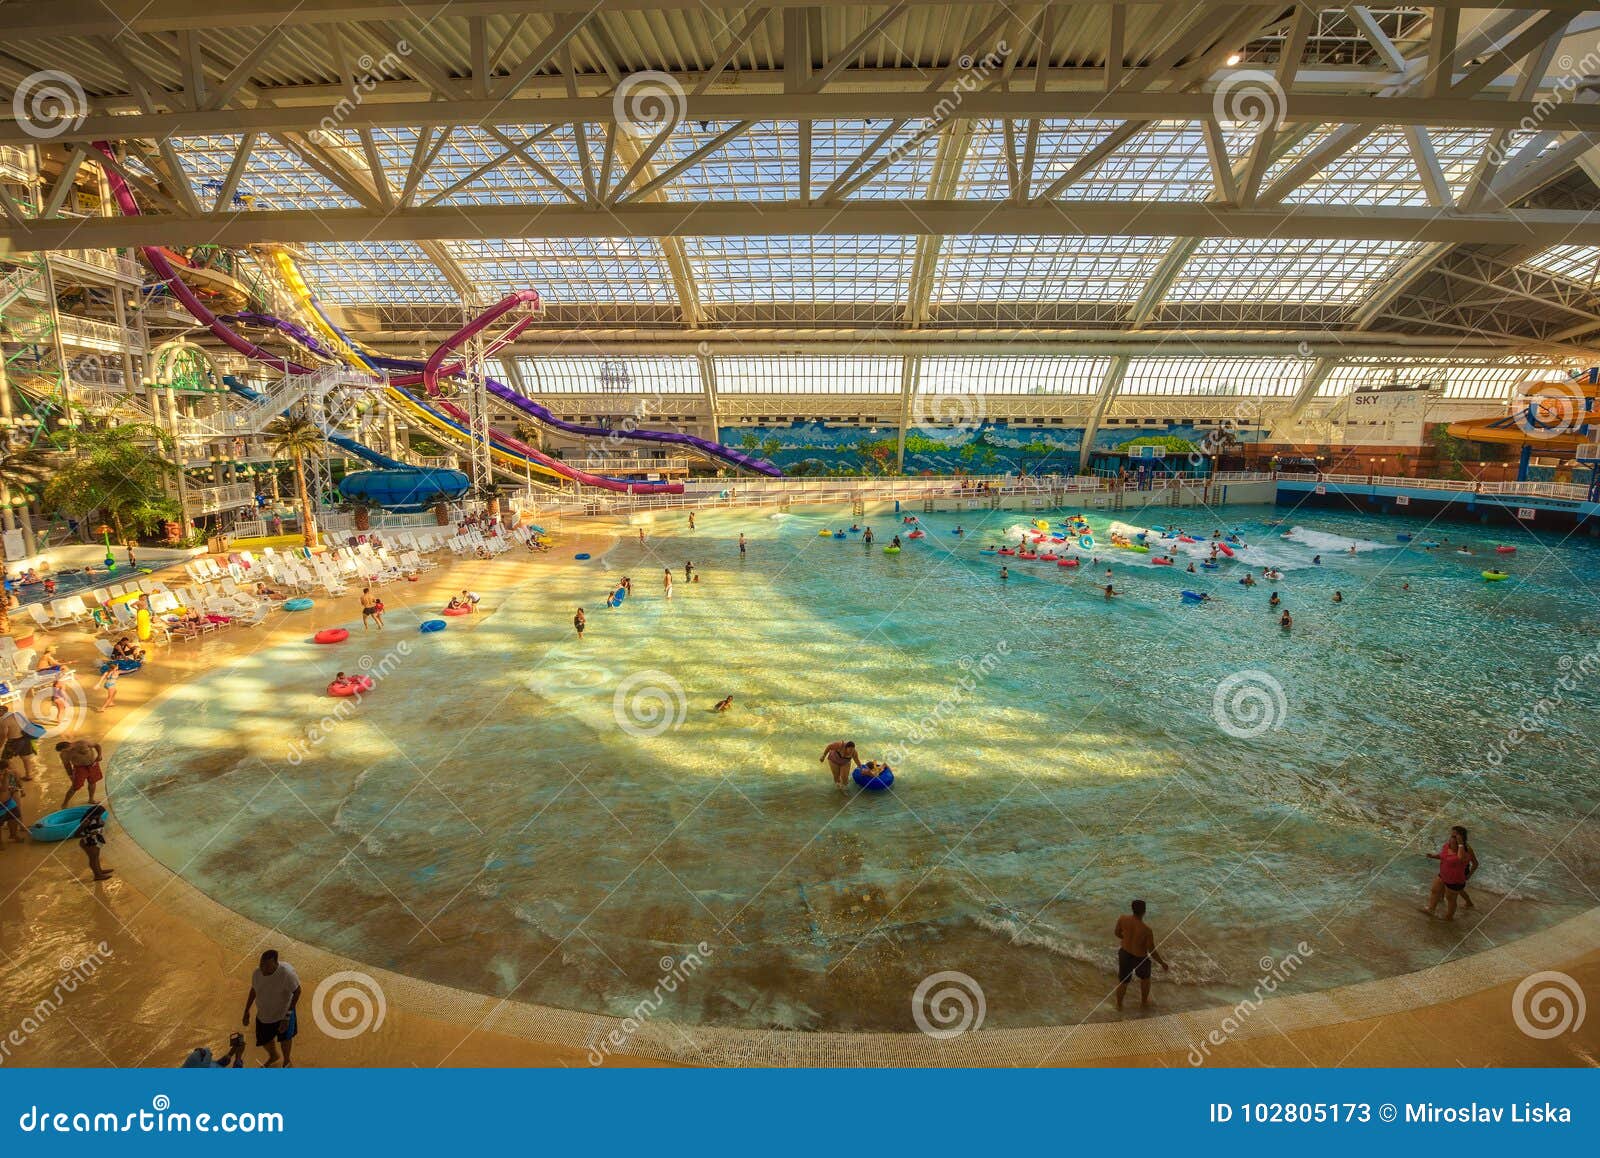 World Waterpark In The West Edmonton Mall Editorial Stock Photo Image Of Tourism Playing